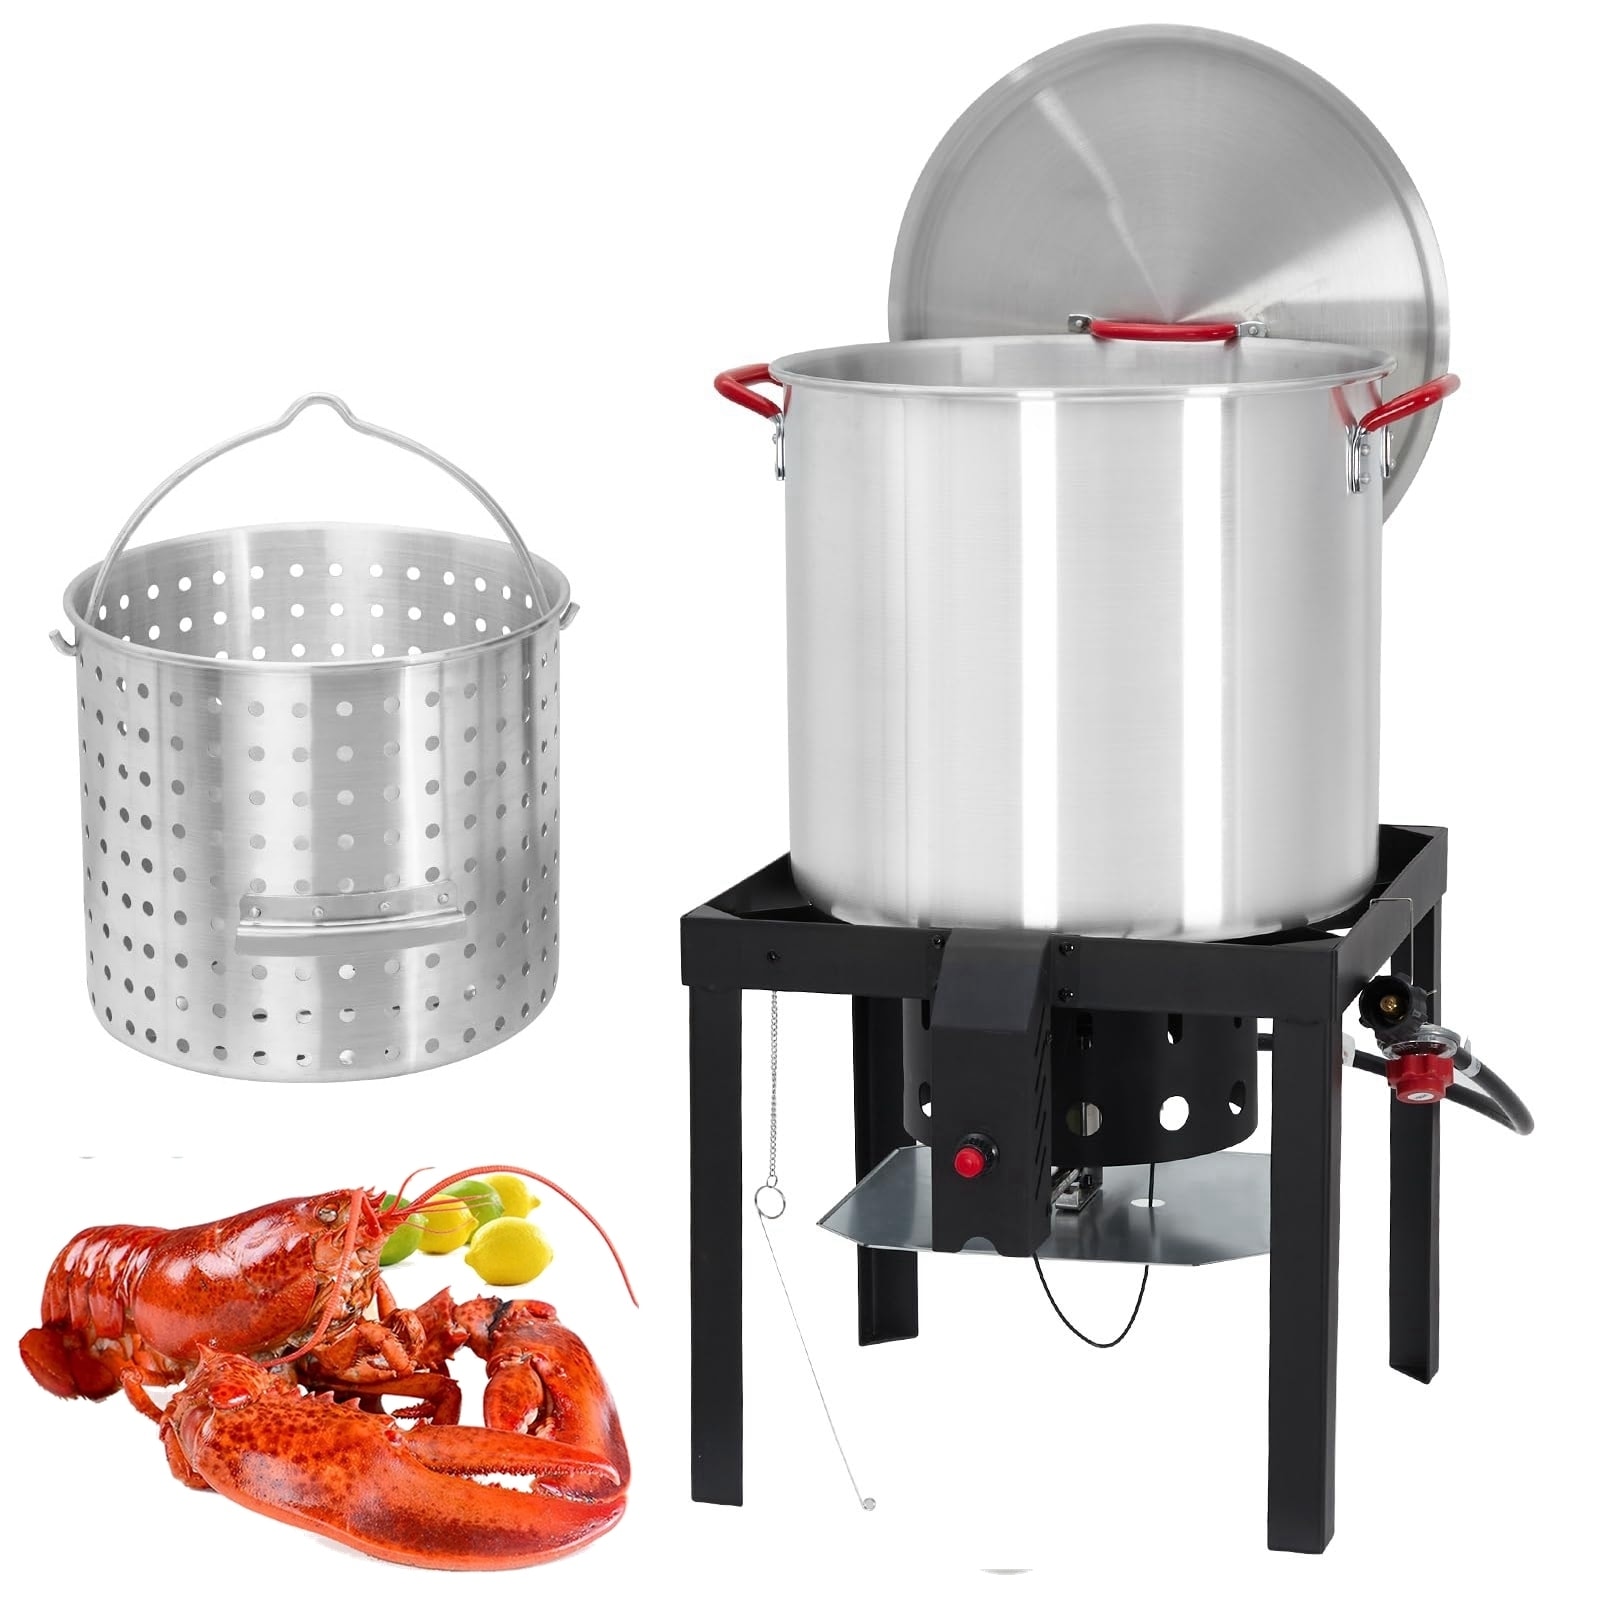 https://ak1.ostkcdn.com/images/products/is/images/direct/572051c69d3334d0cbce55185fe31e121854bfb3/Seafood-Boil-Pot-and-Burner-Kit%2C-Aluminum-Stock-Pot-with-Strainer.jpg